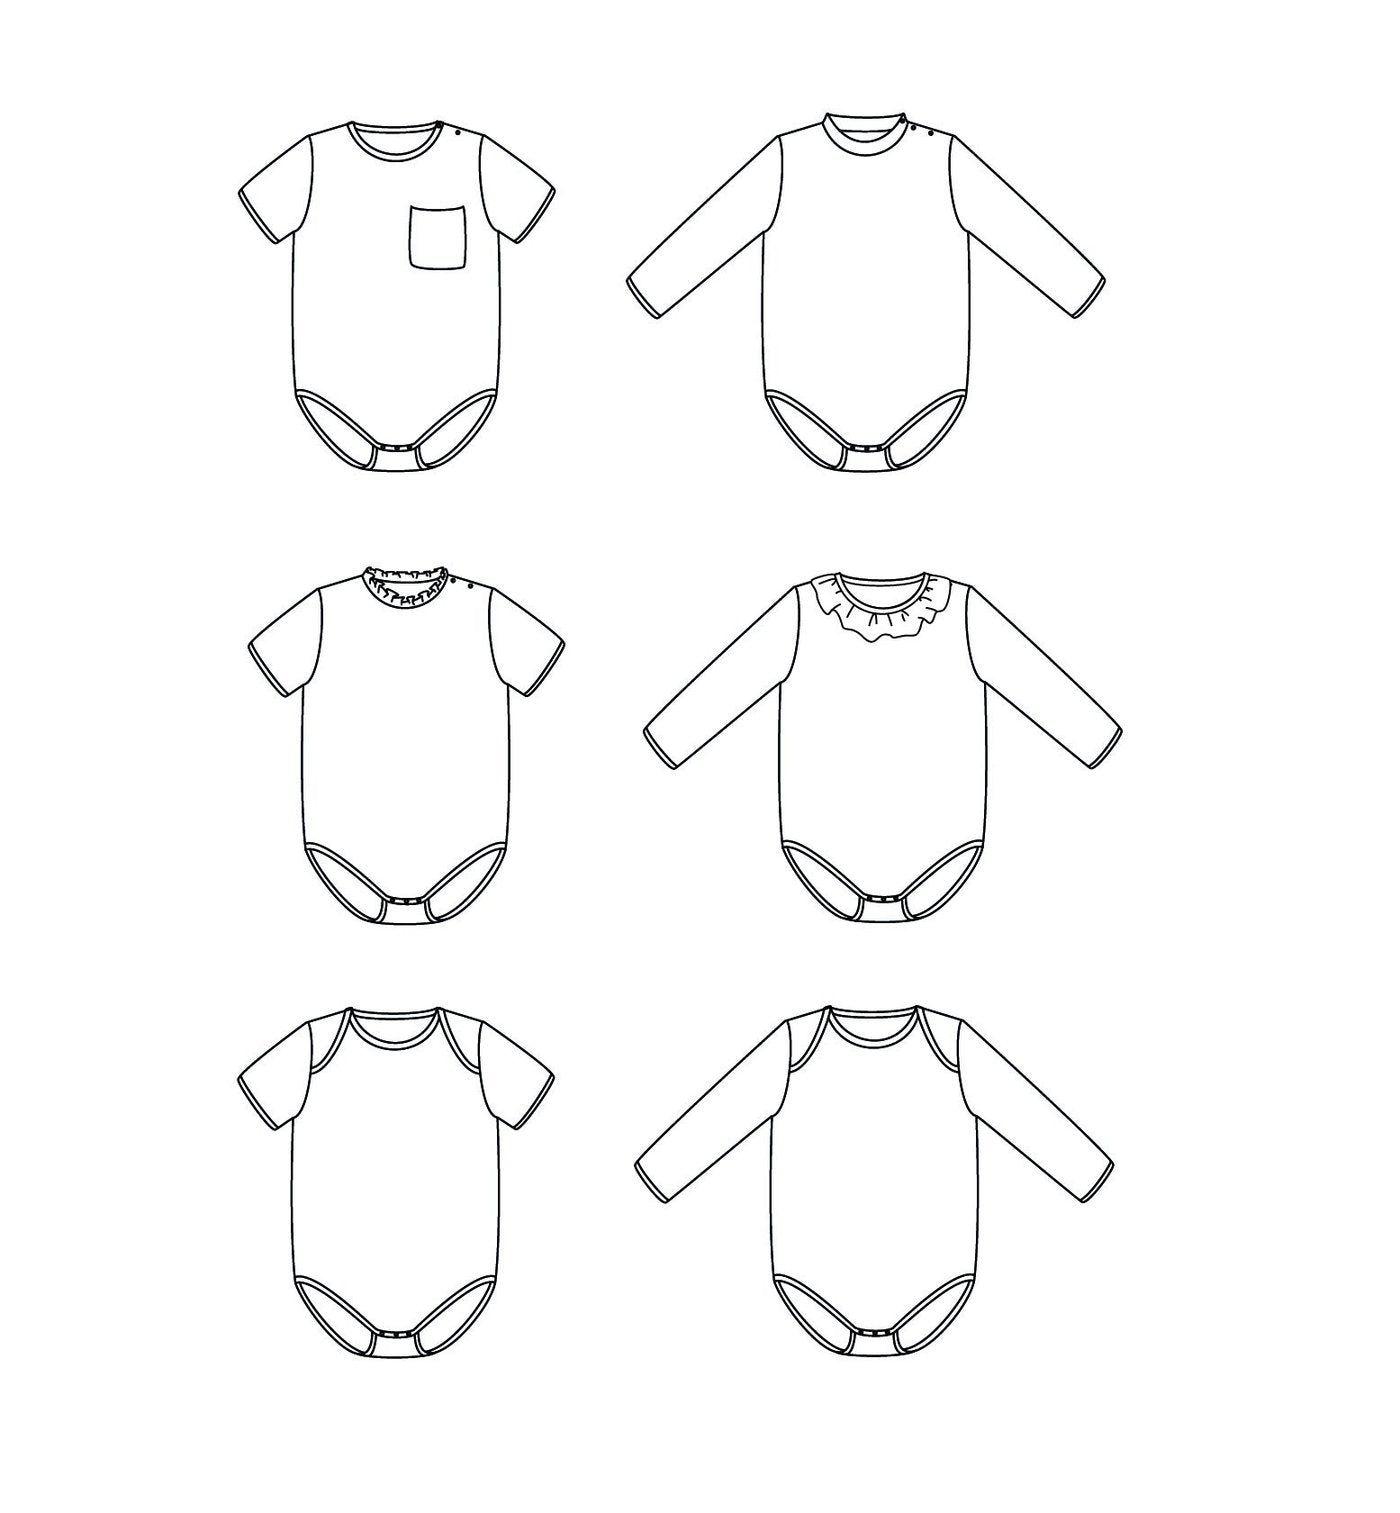 Ikatee - MALMO Baby onesie 1M-4Y - Paper Sewing Pattern